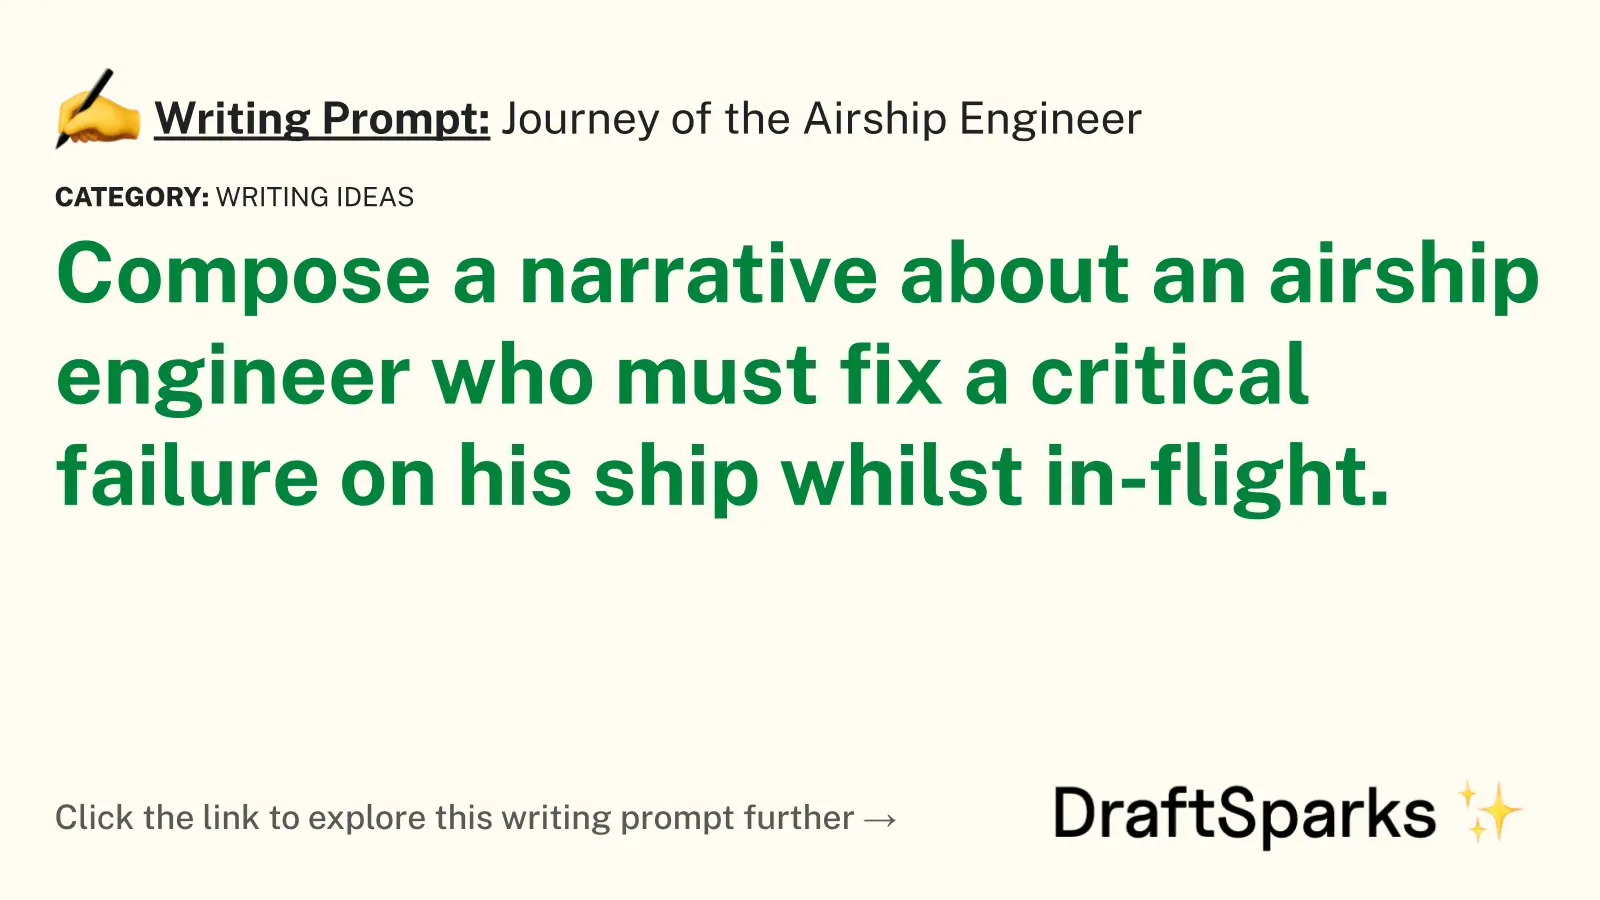 Journey of the Airship Engineer